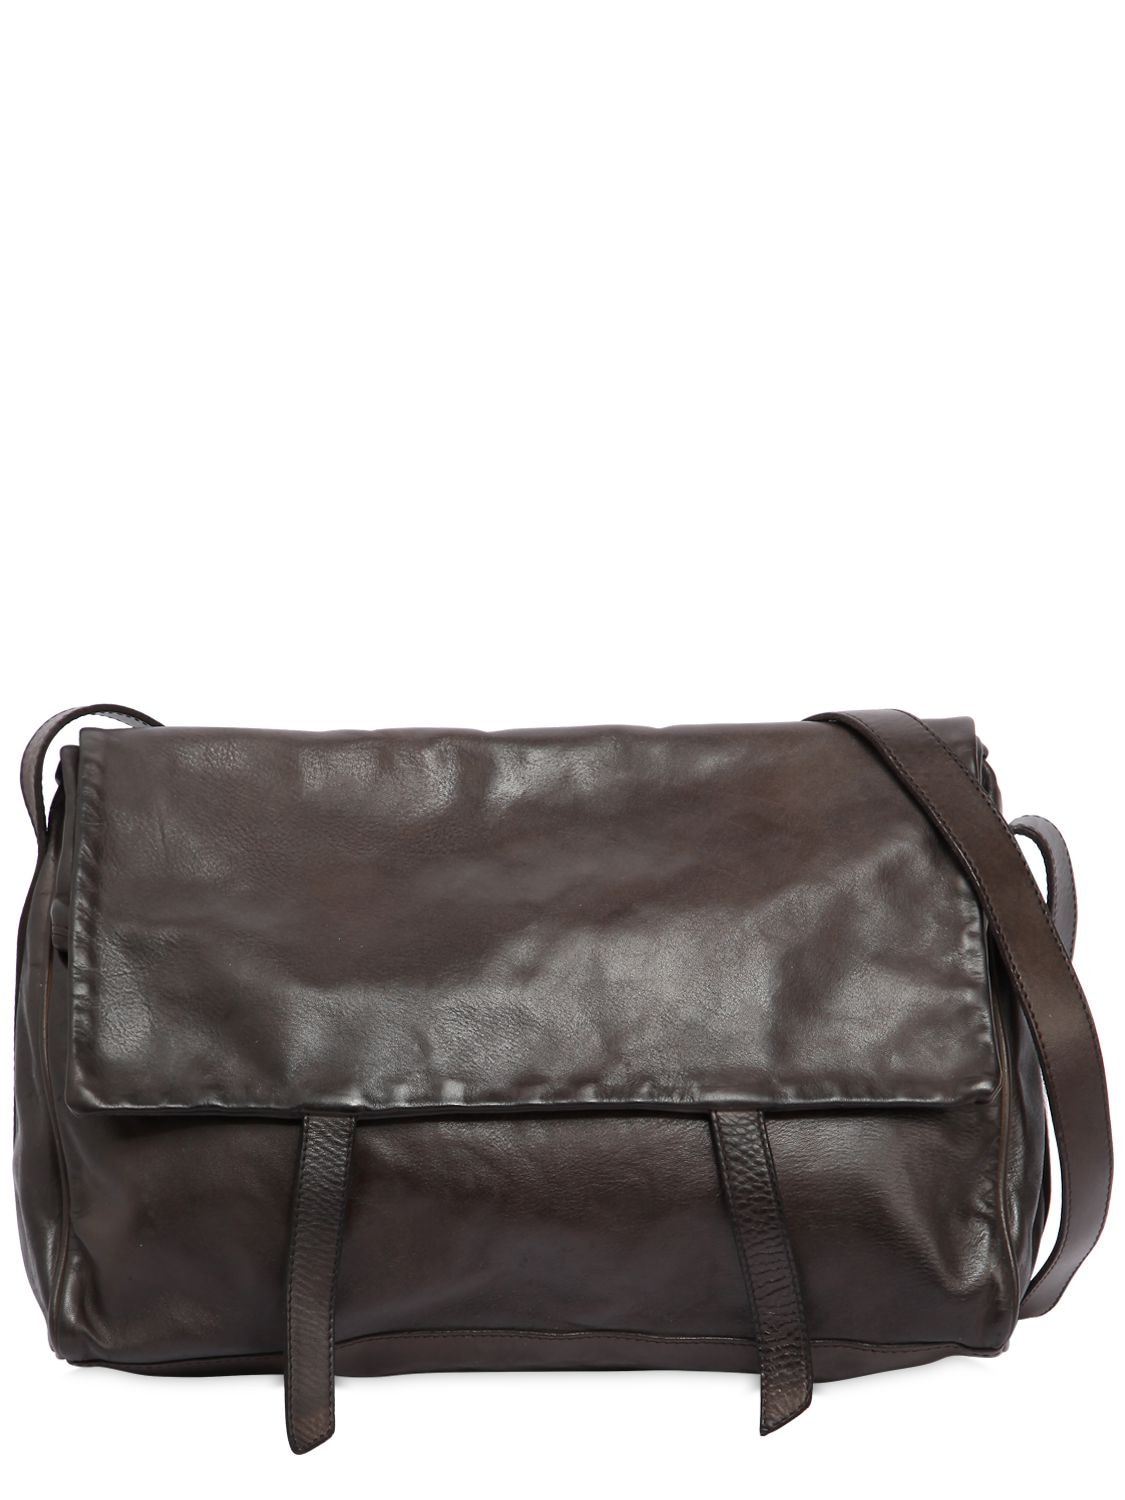 Numero 10 Edmond Leather Messenger Bag In Brown